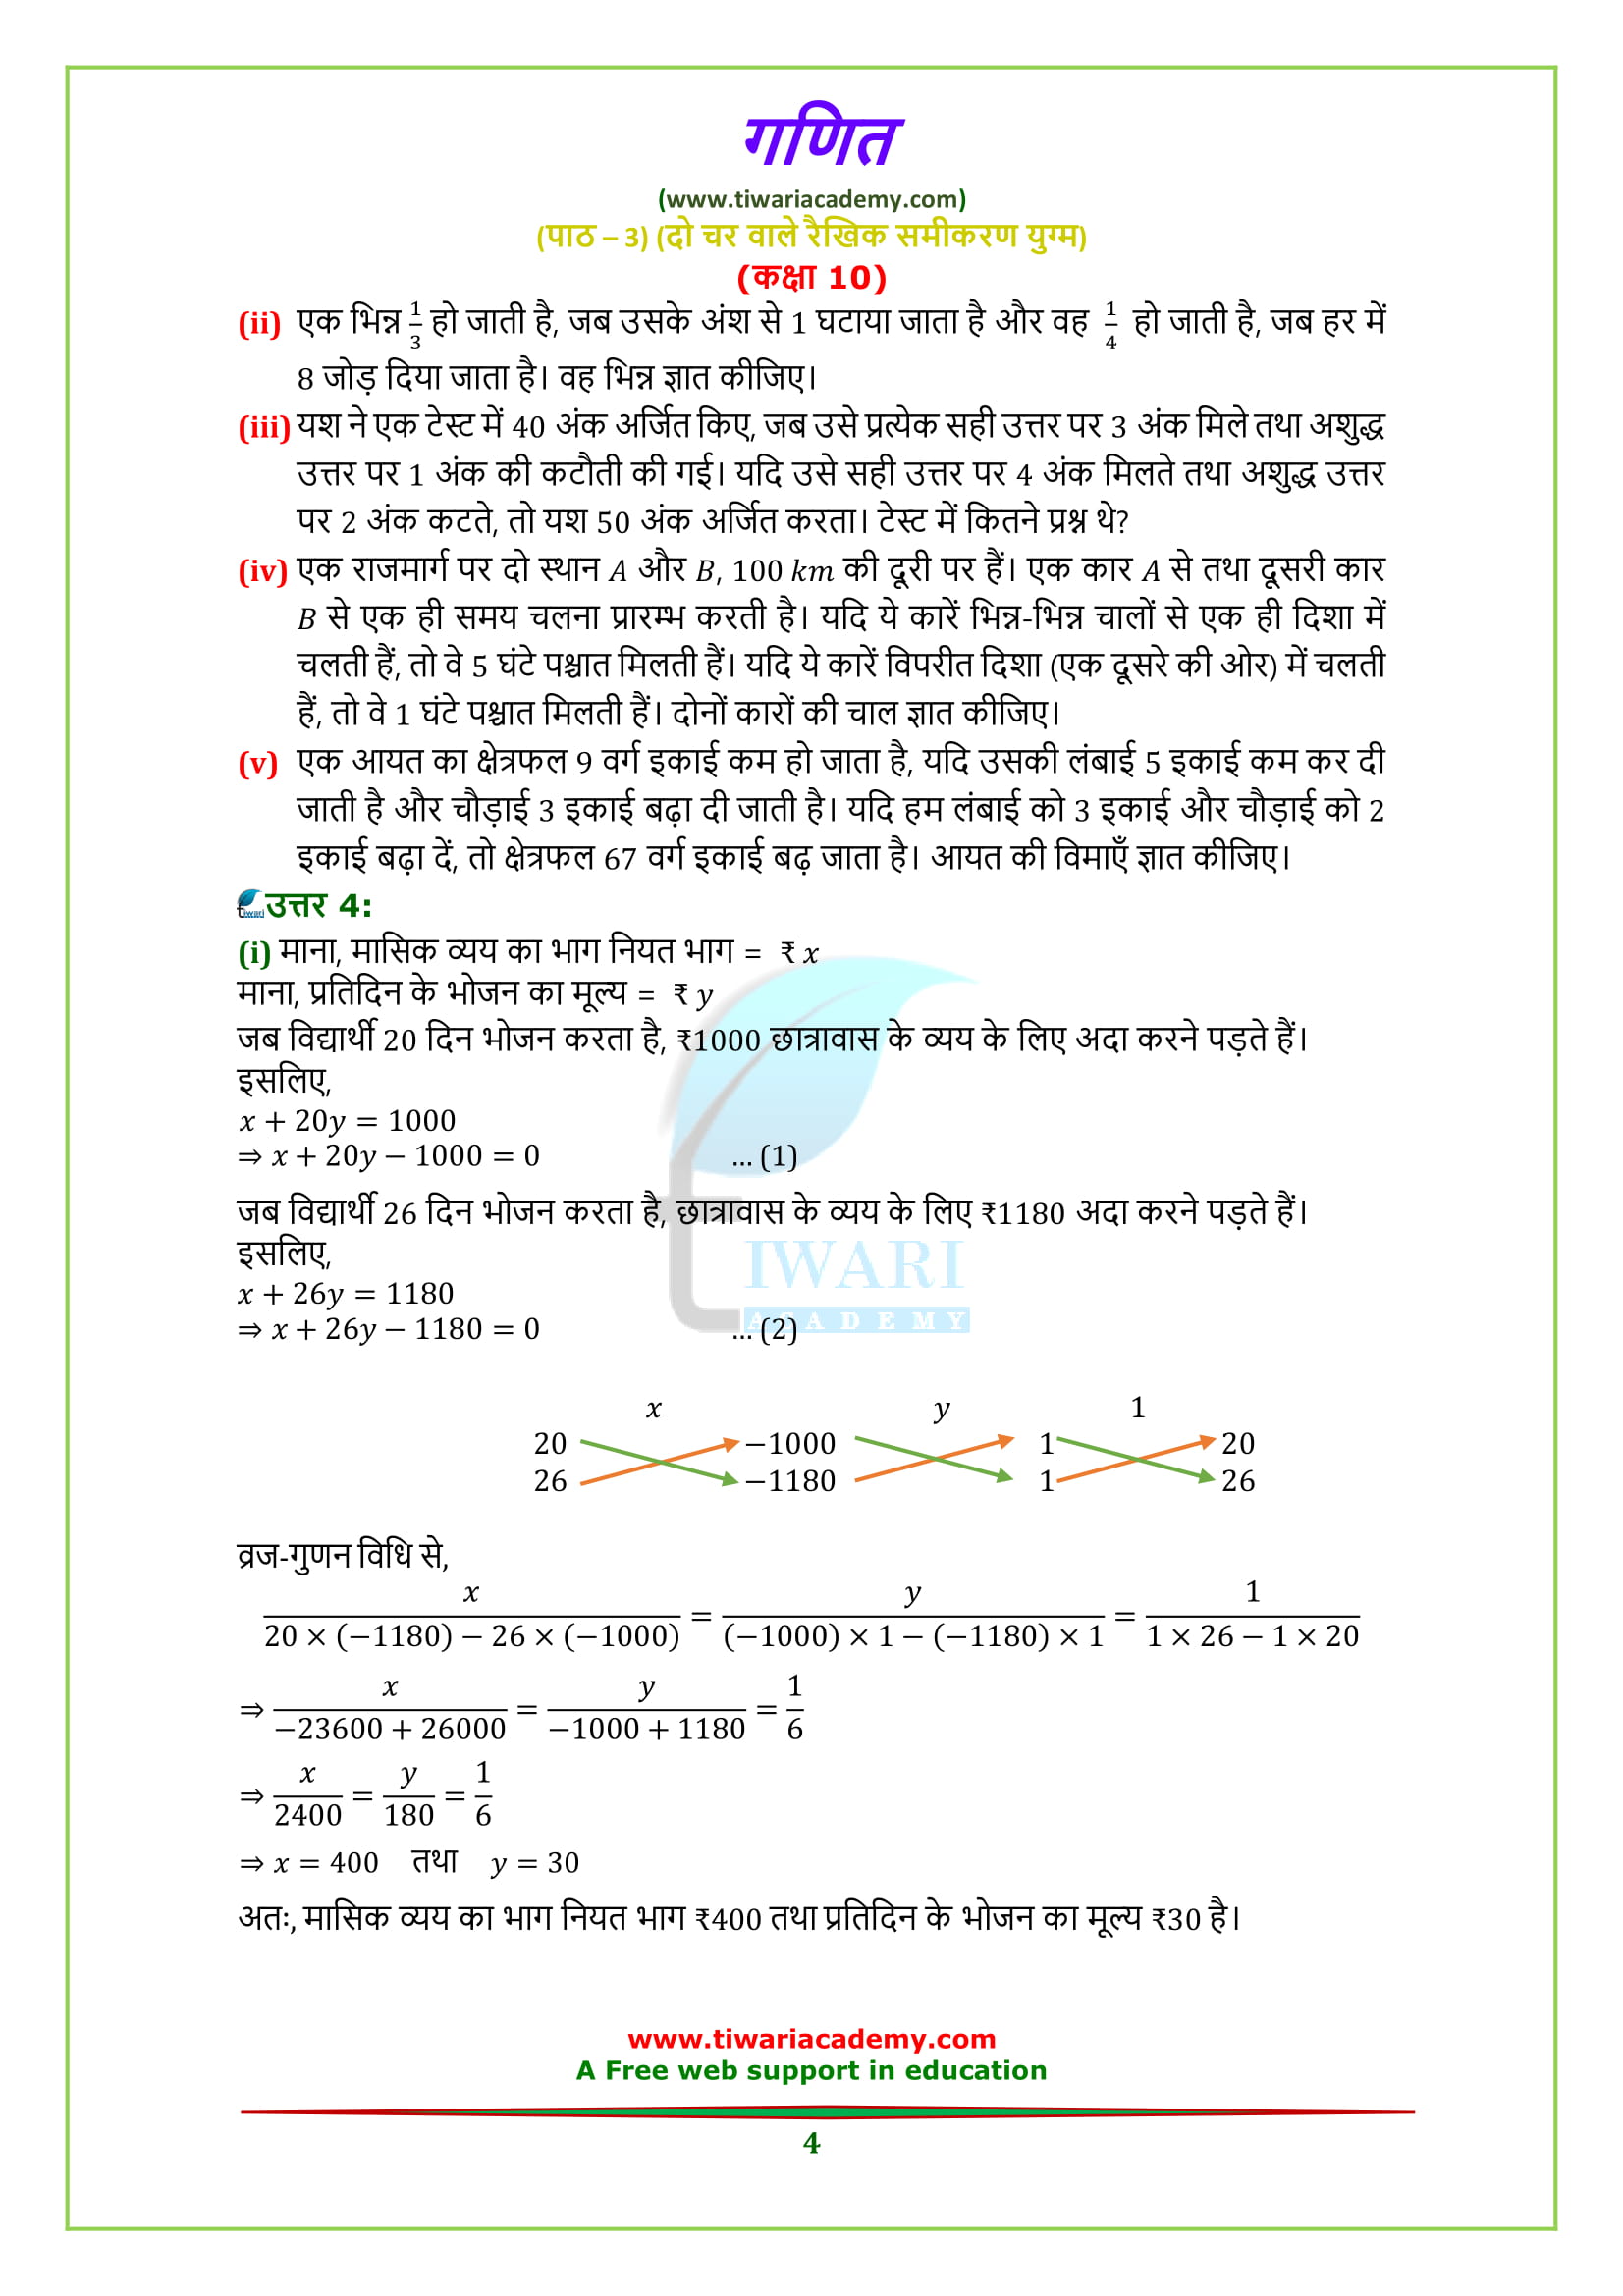 Class 10 maths chapter 3 exercise 3.5 in hindi pdf